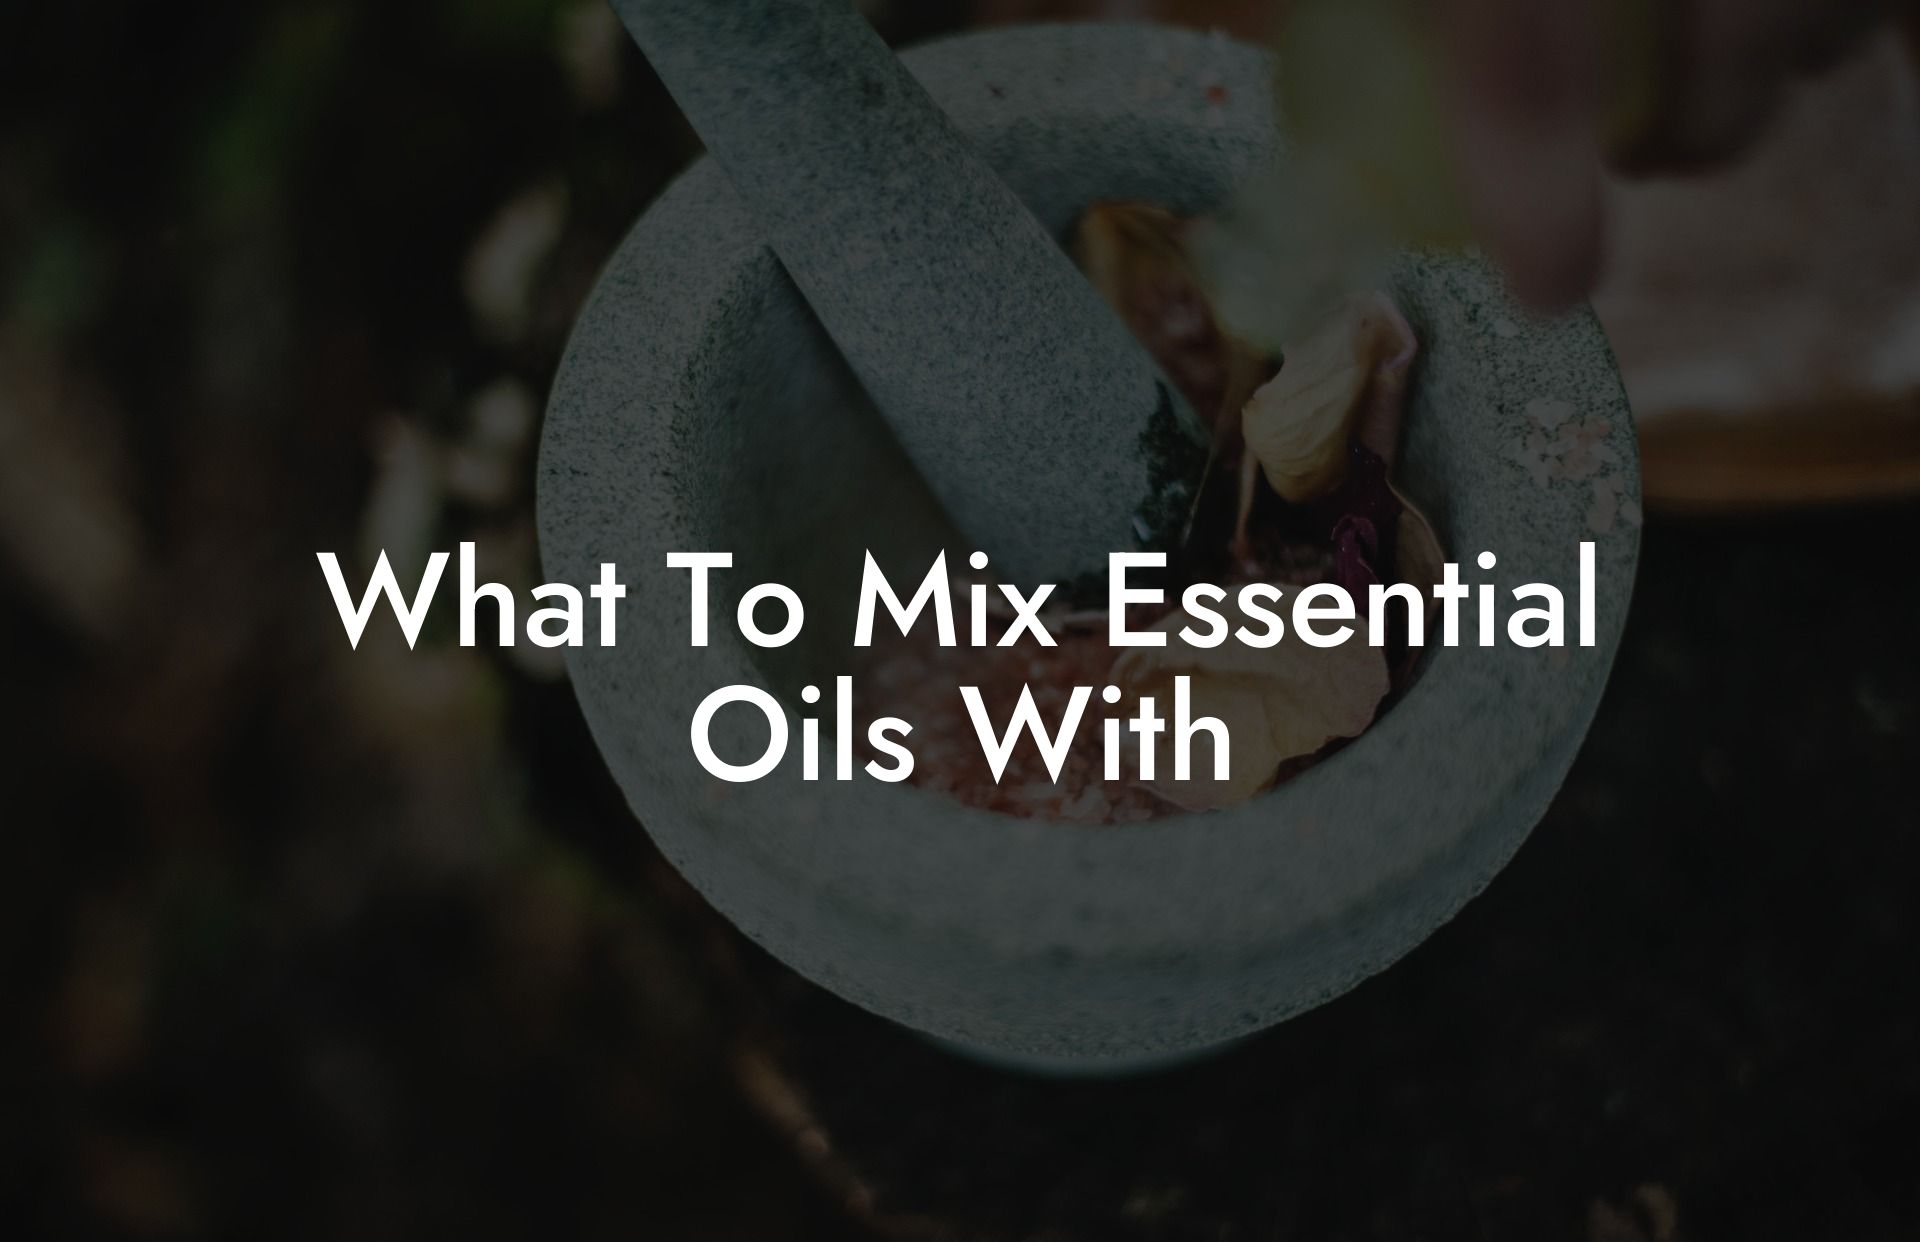 What To Mix Essential Oils With